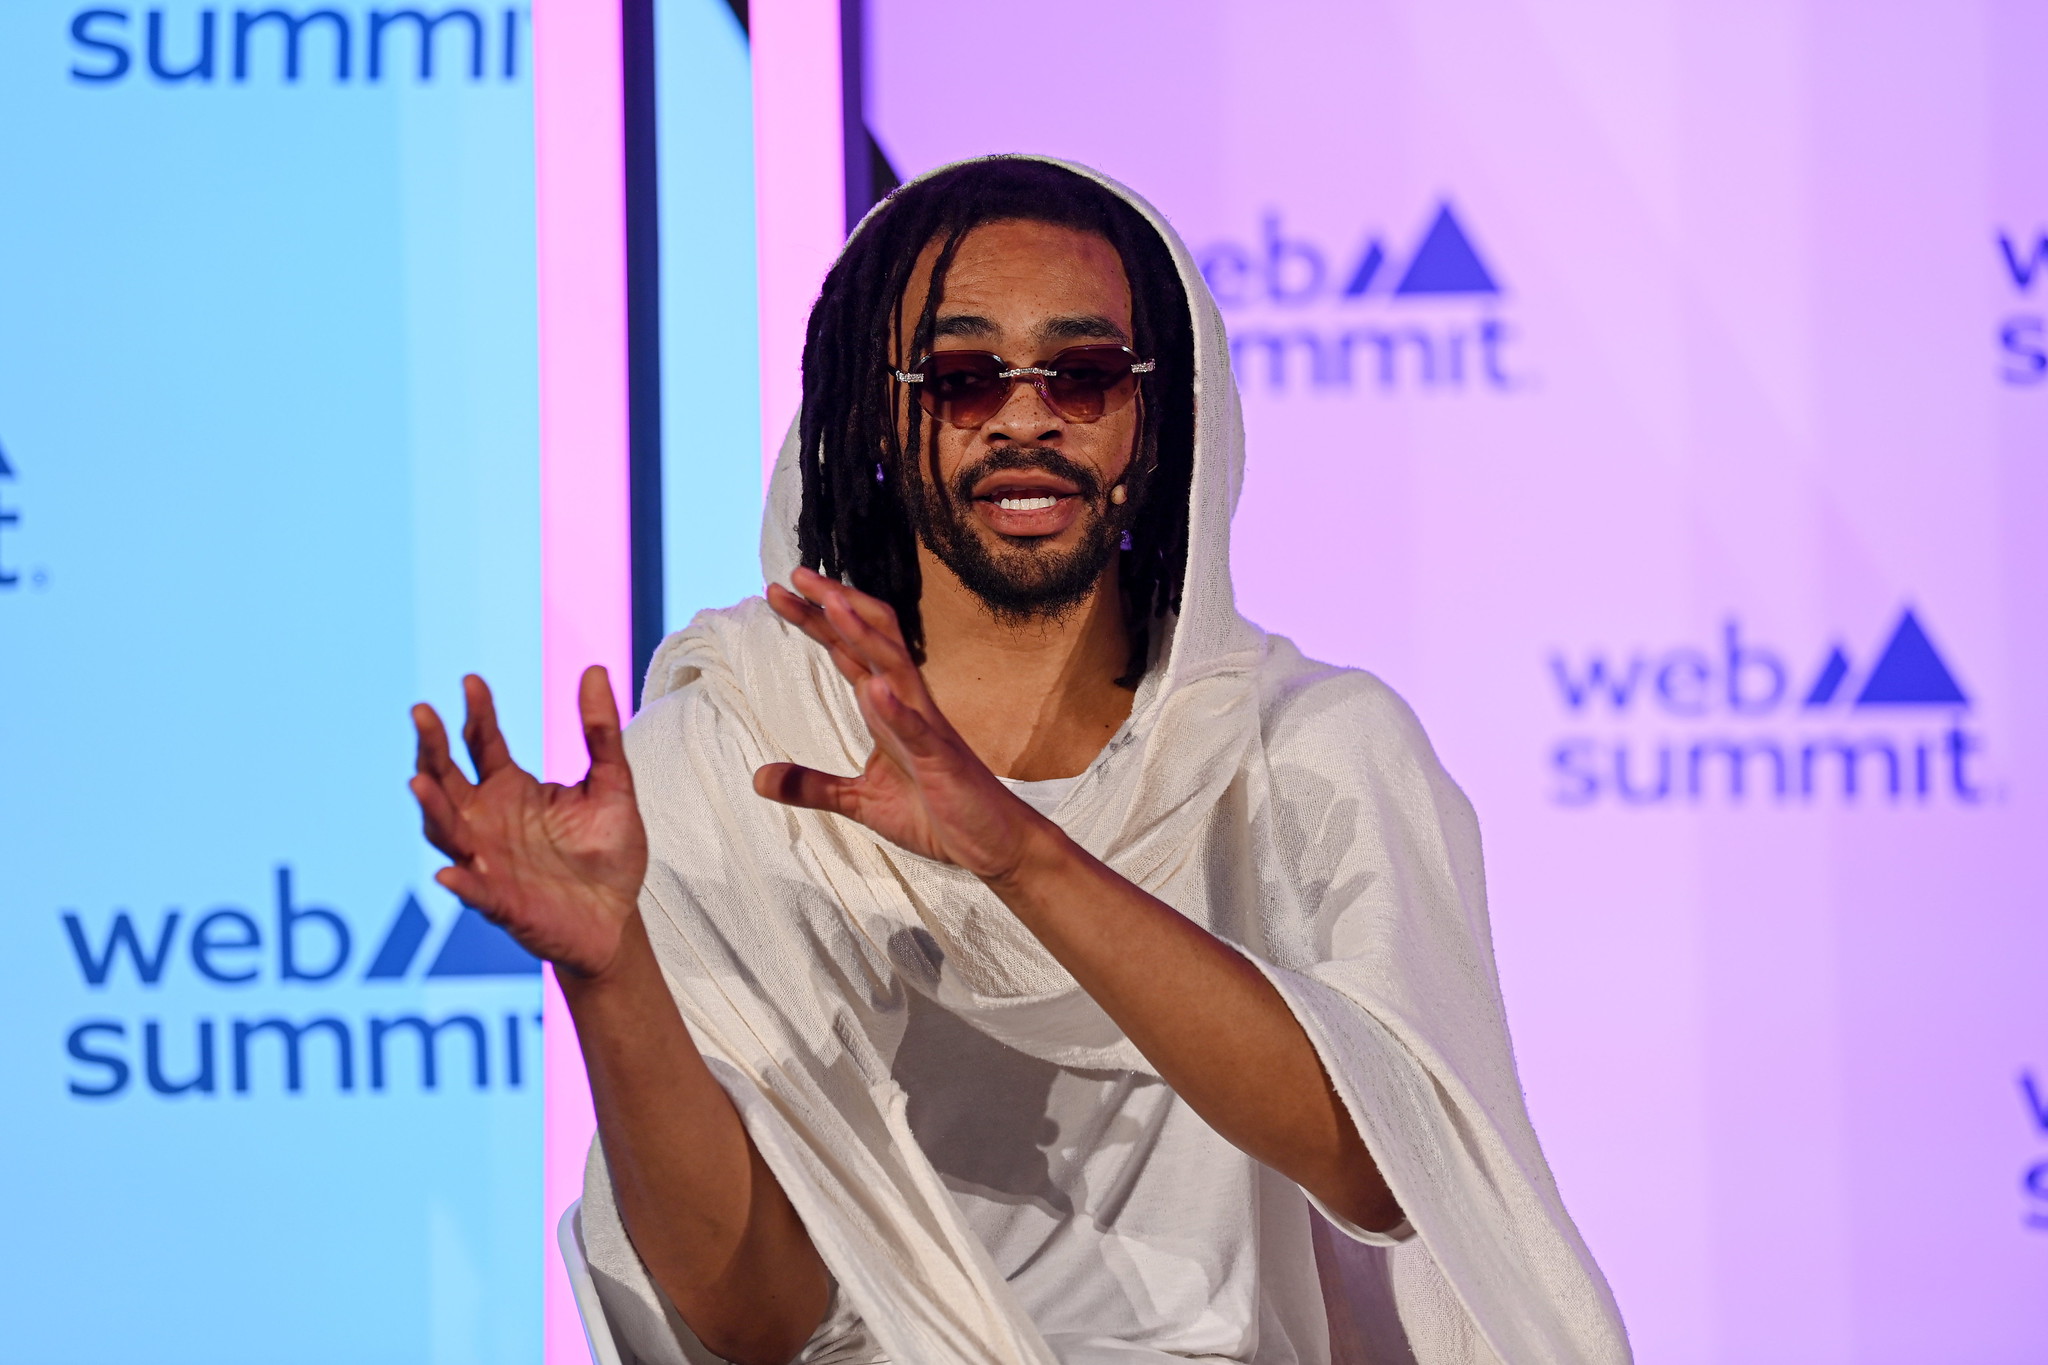 Maejor Brandon Michael Green, Singer, Songwriter & Producer, on Audio Waves Stage during day three of Web Summit 2023 at the Altice Arena in Lisbon, Portugal